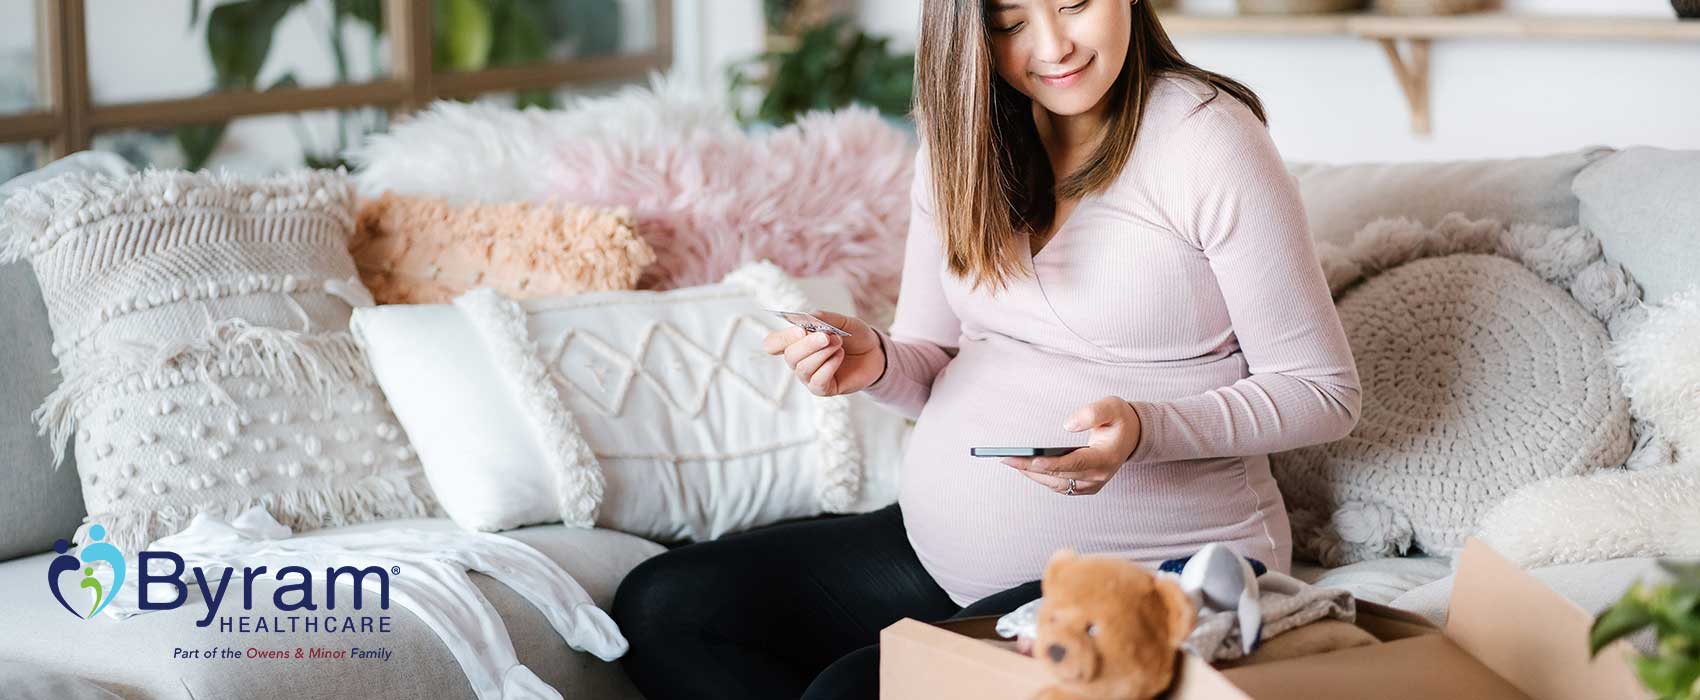 Pregnant woman looking a baby gifts.